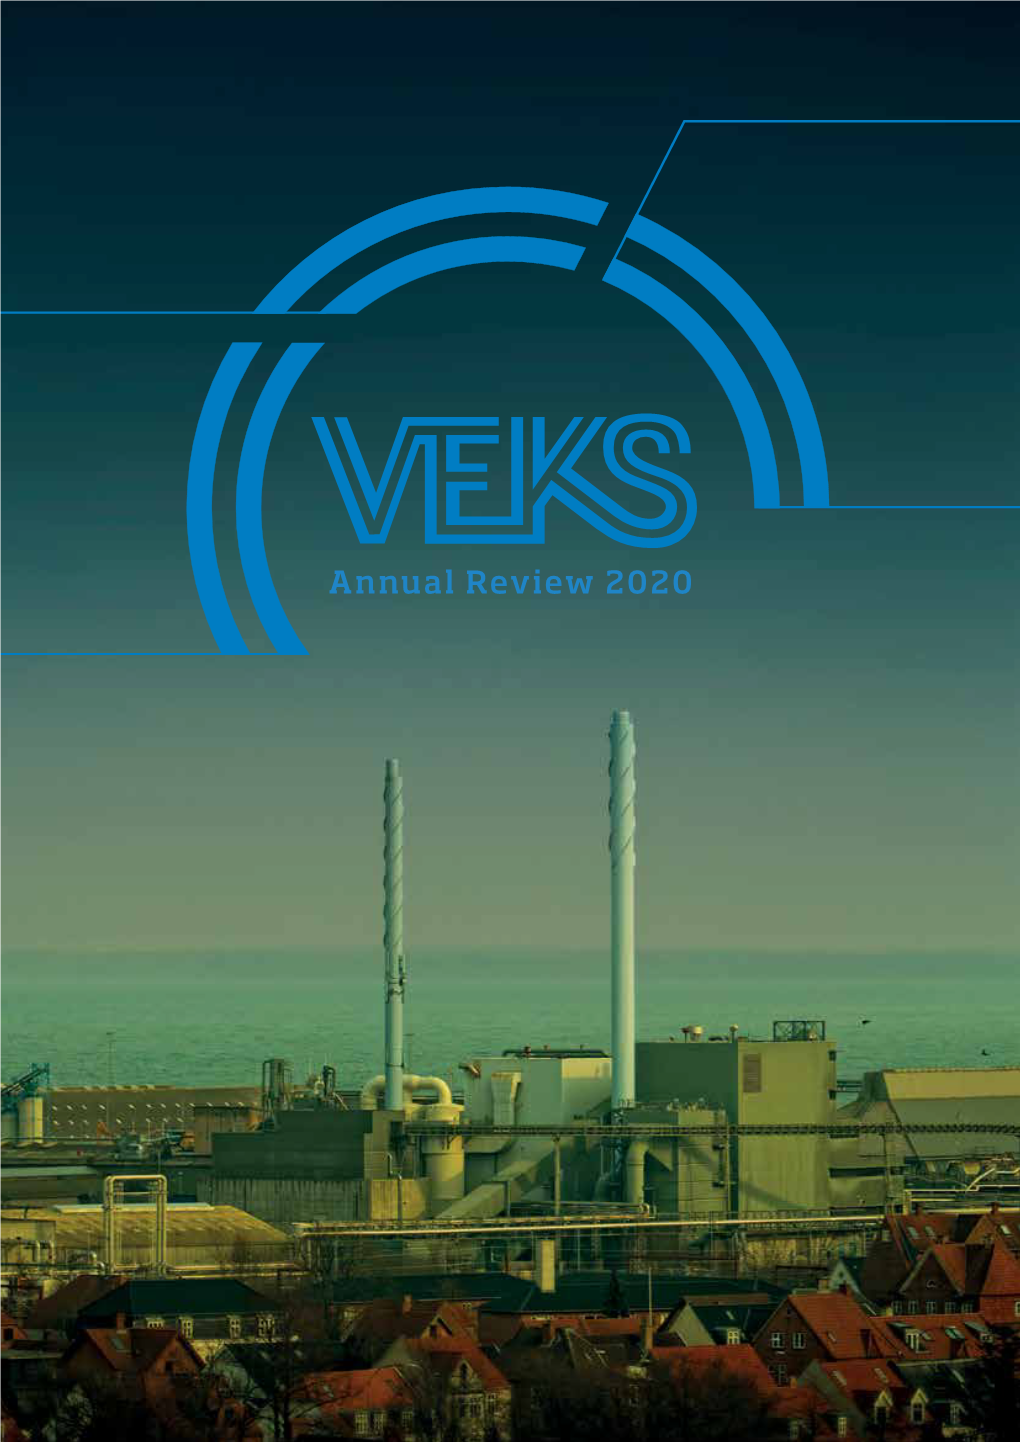 VEKS' Annual Review 2020